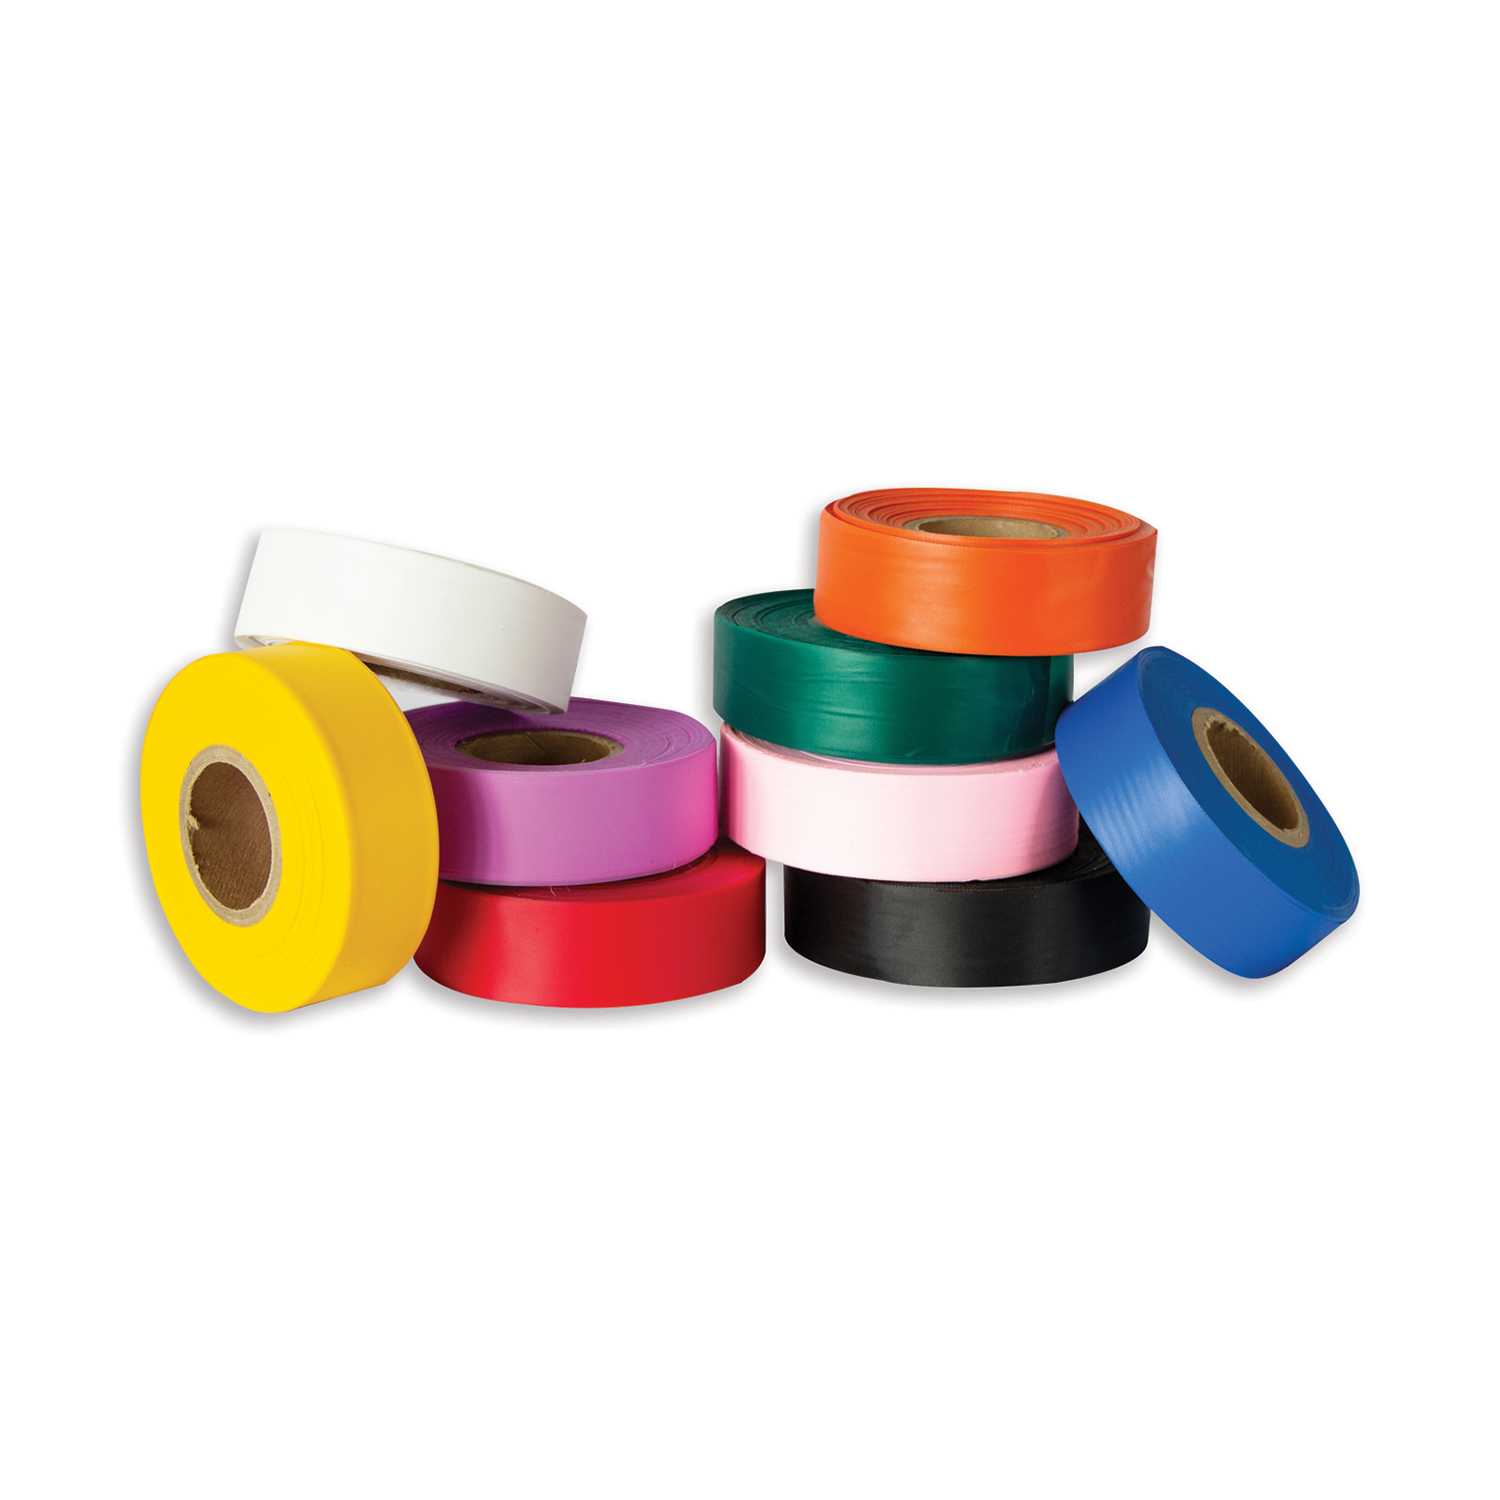 Tagging Tape Assorted Colors Case of 12 rolls Flagging 